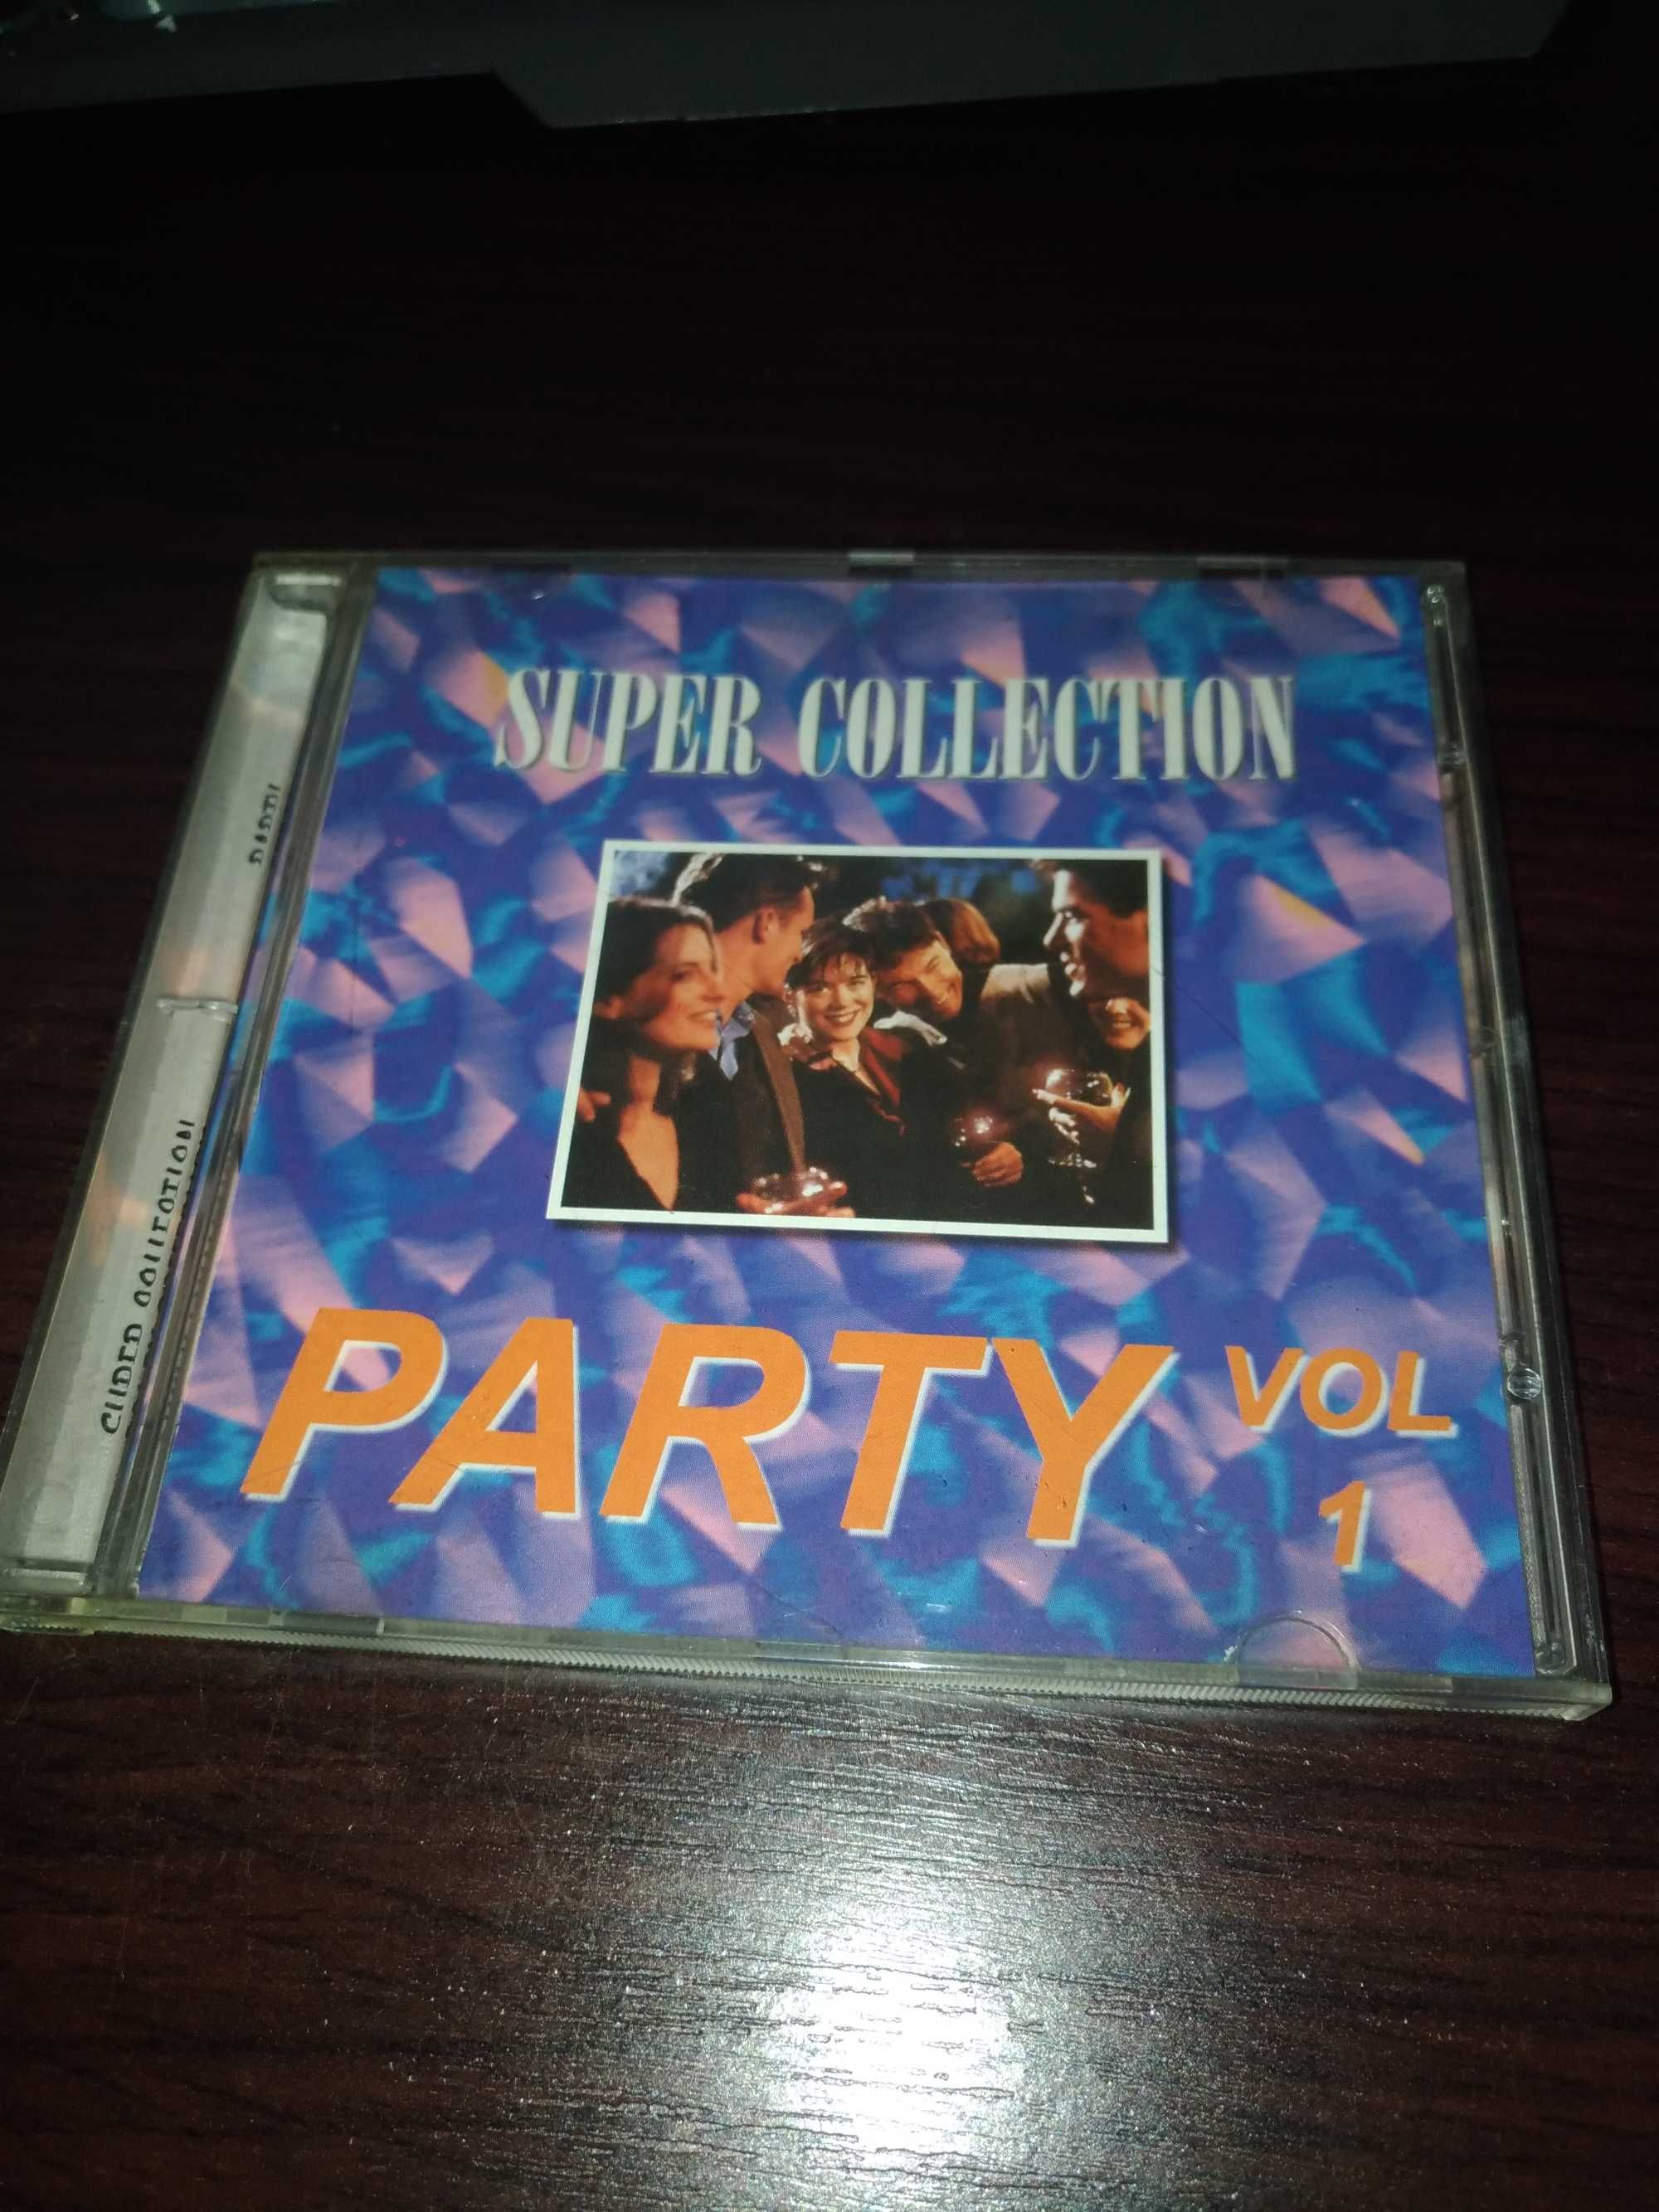 CD: Super Collection Party vol.1